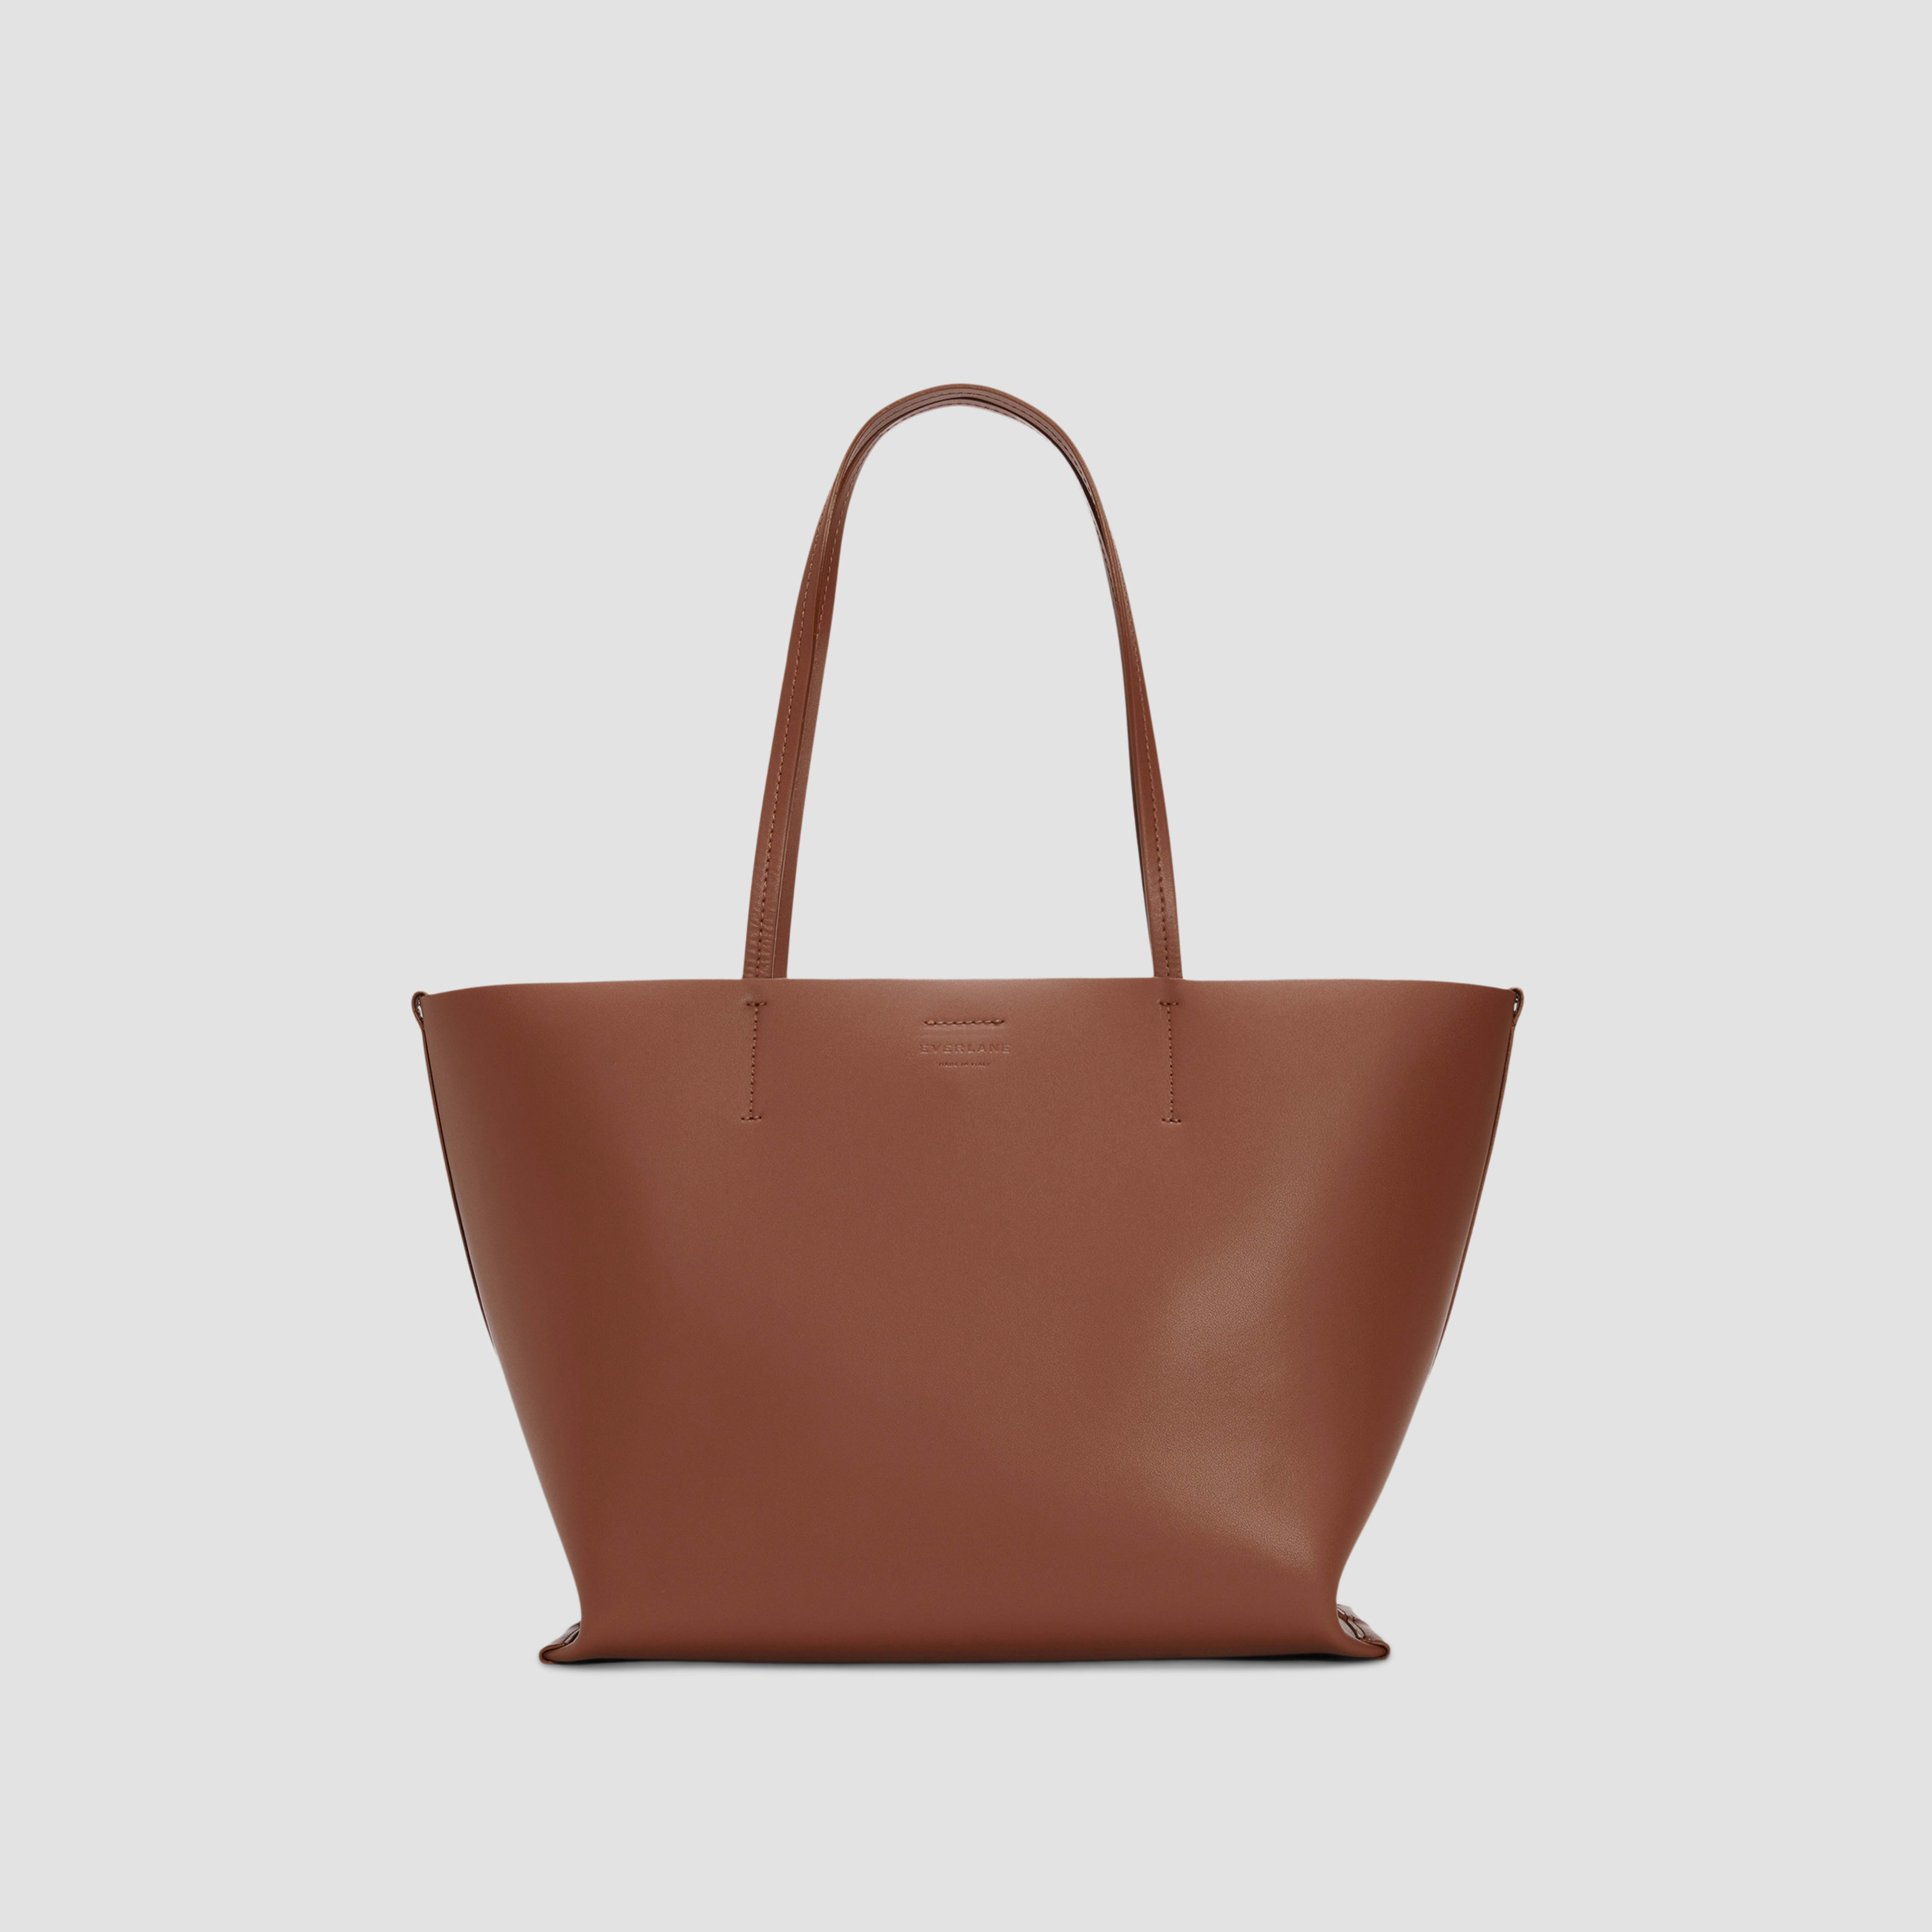 women's luxe medium italian leather tote bag by everlane in cognac